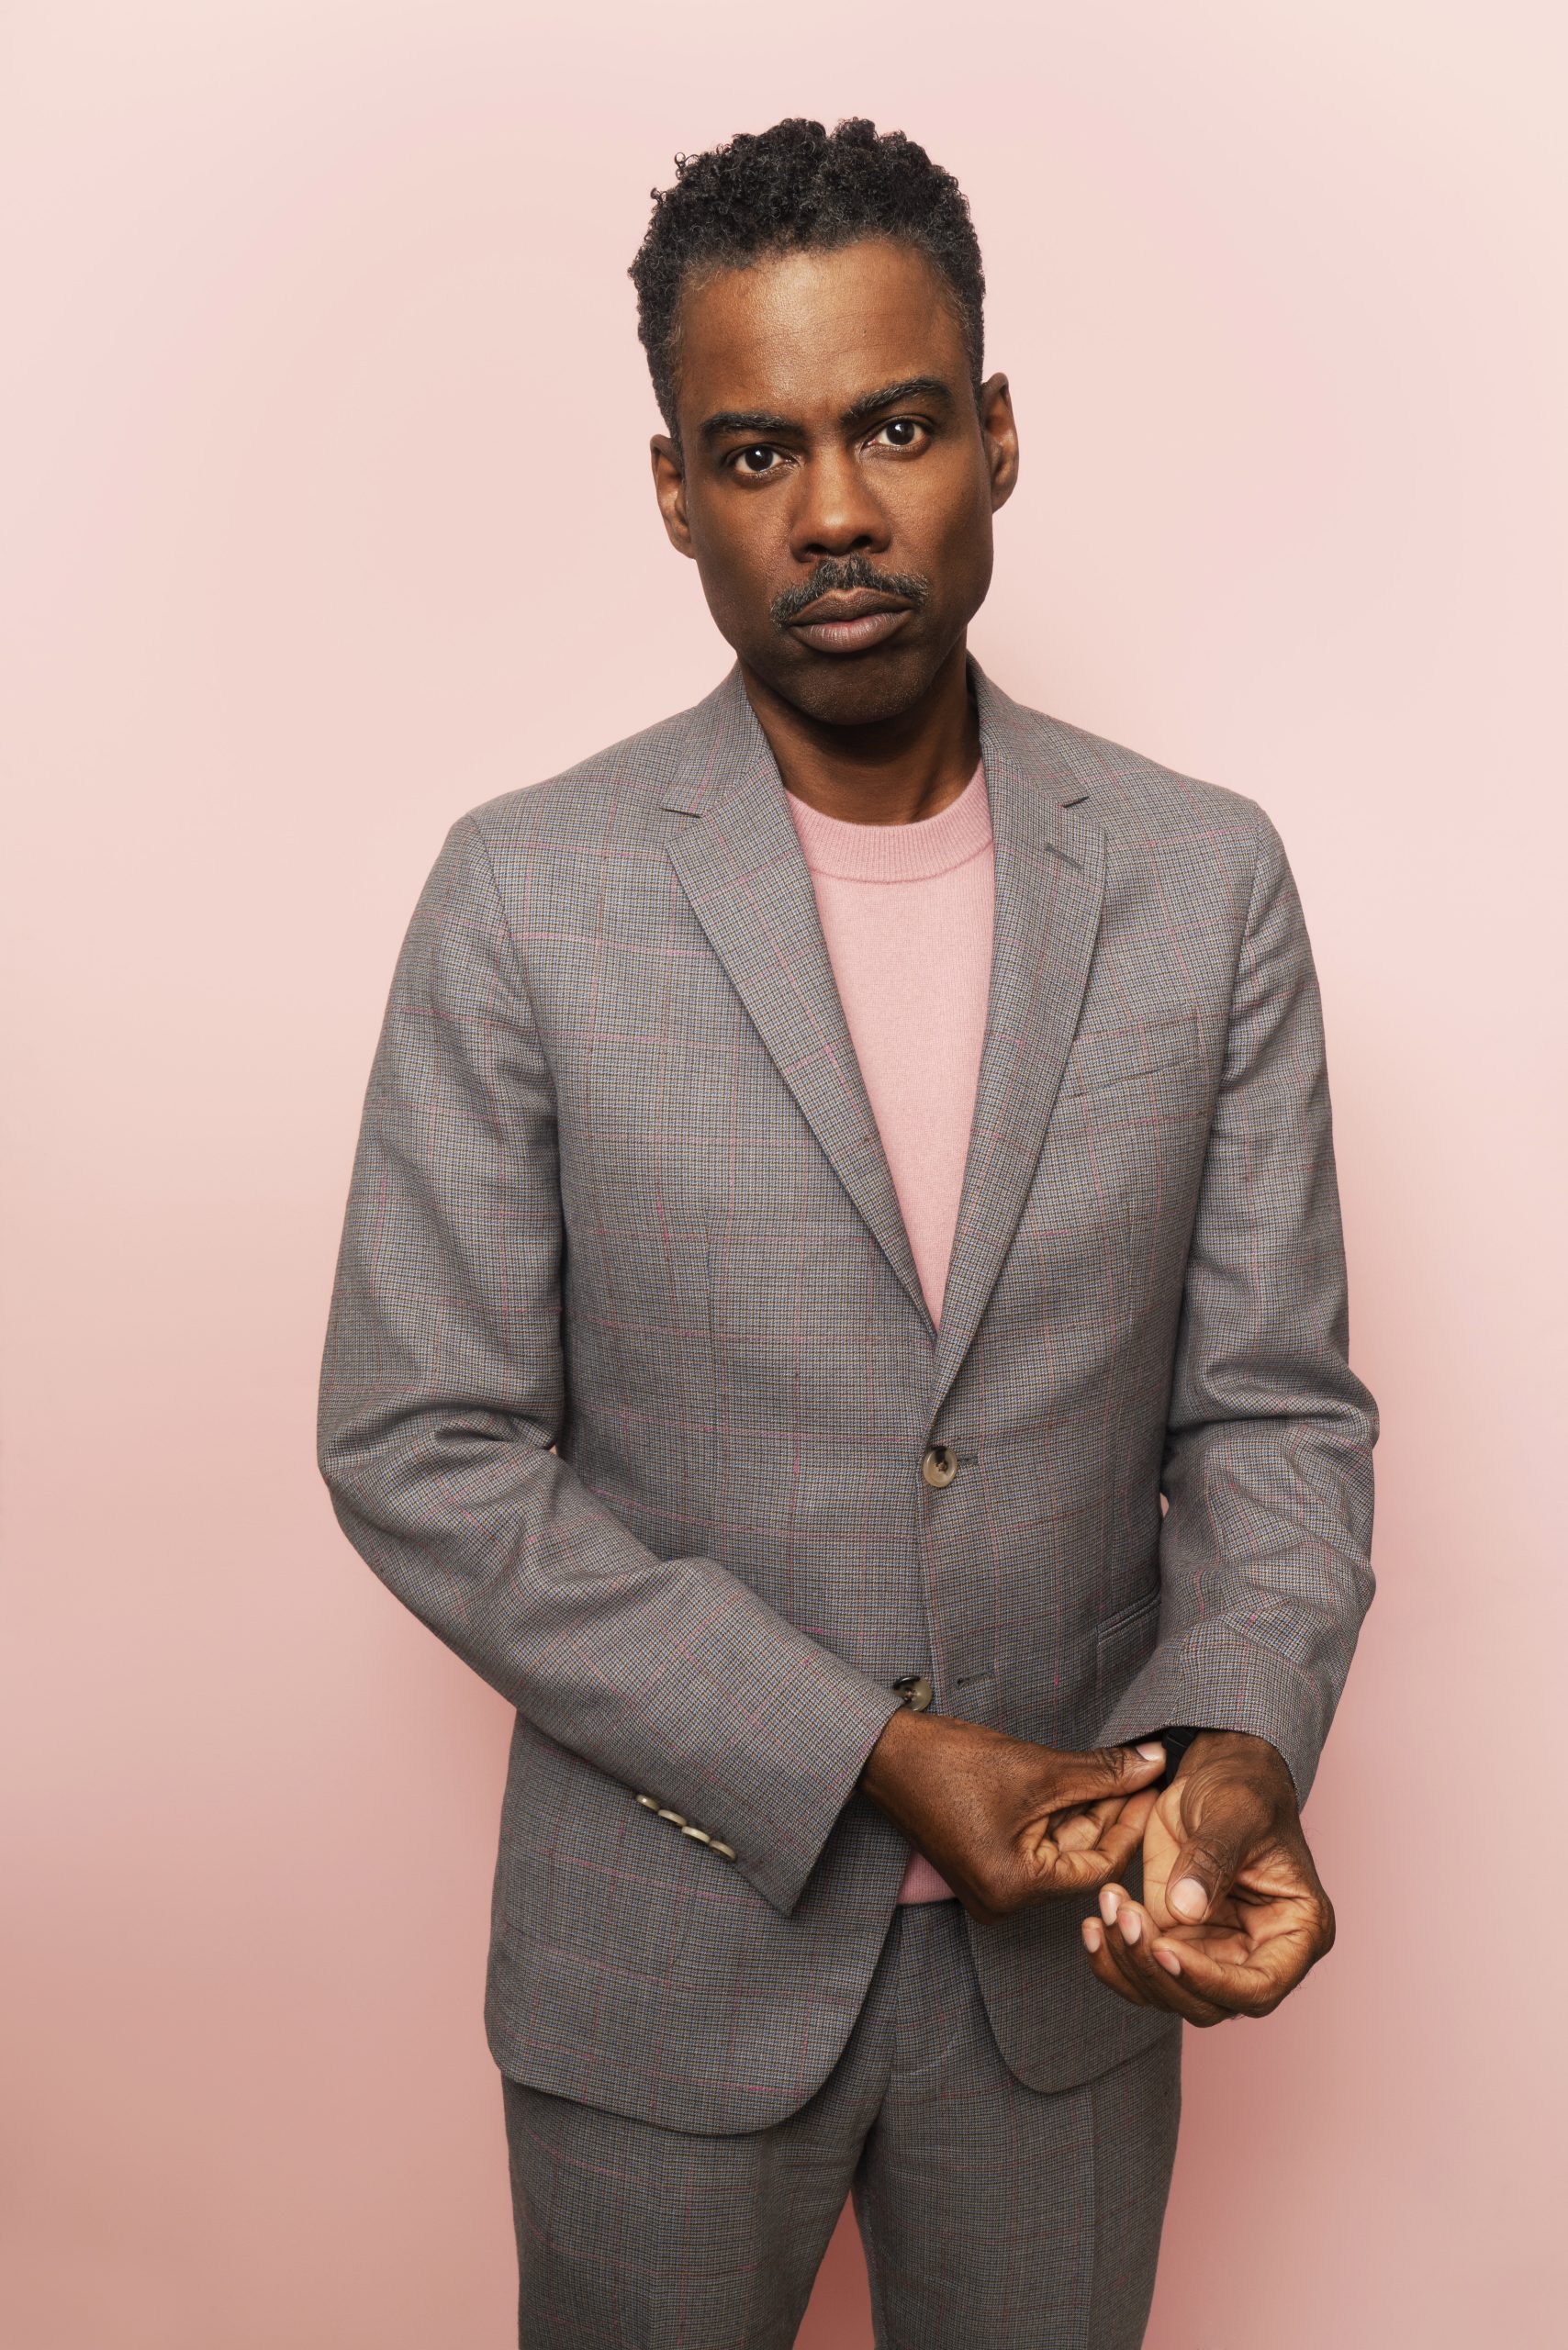 Chris Rock Will Make History As The First Comic To Perform Live On Netflix!